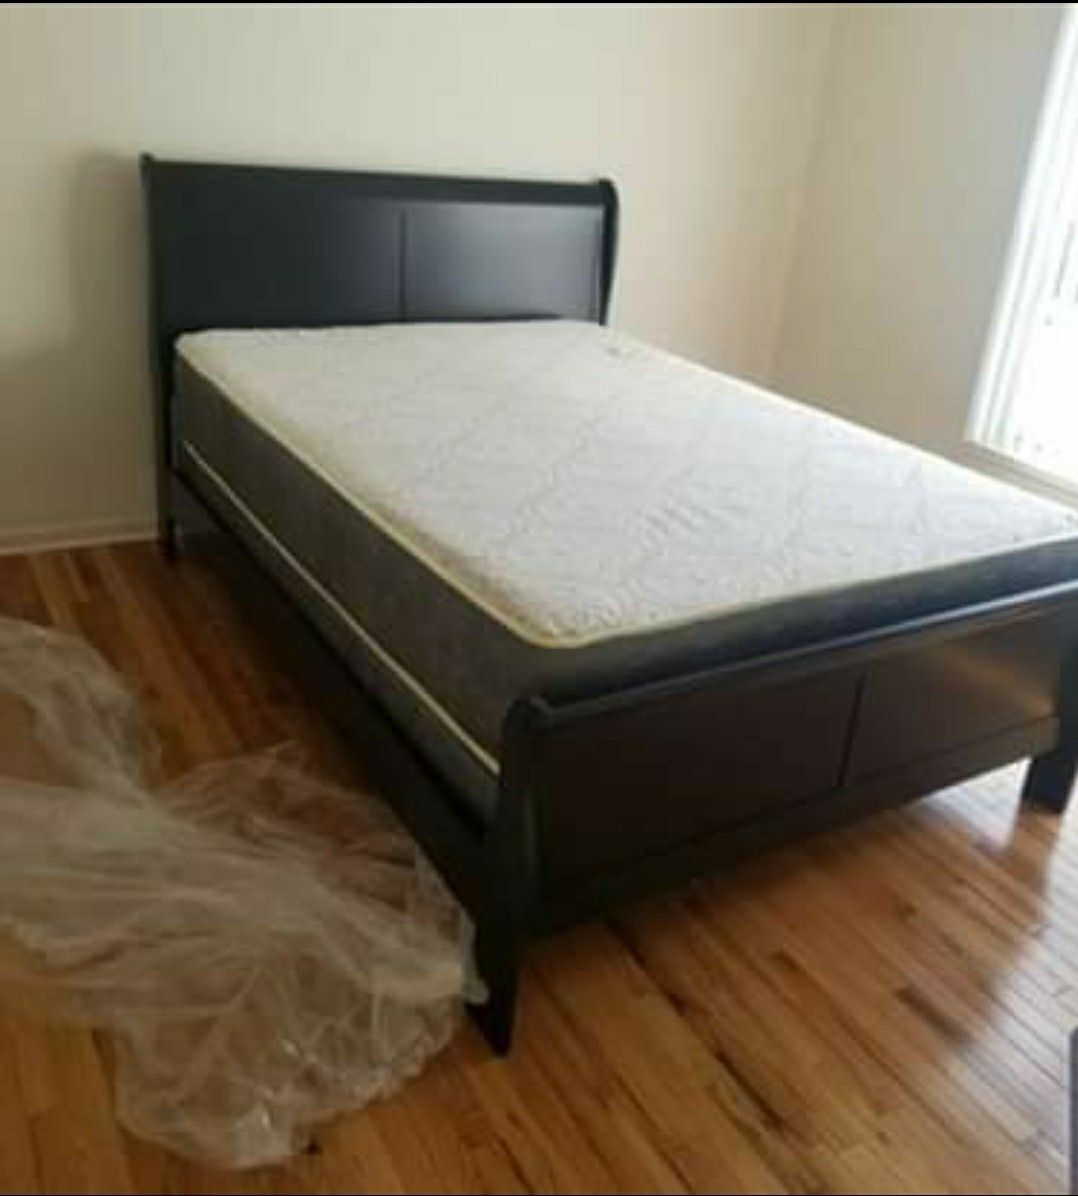 Brand new in box queen bed frame includes mattress and box spring